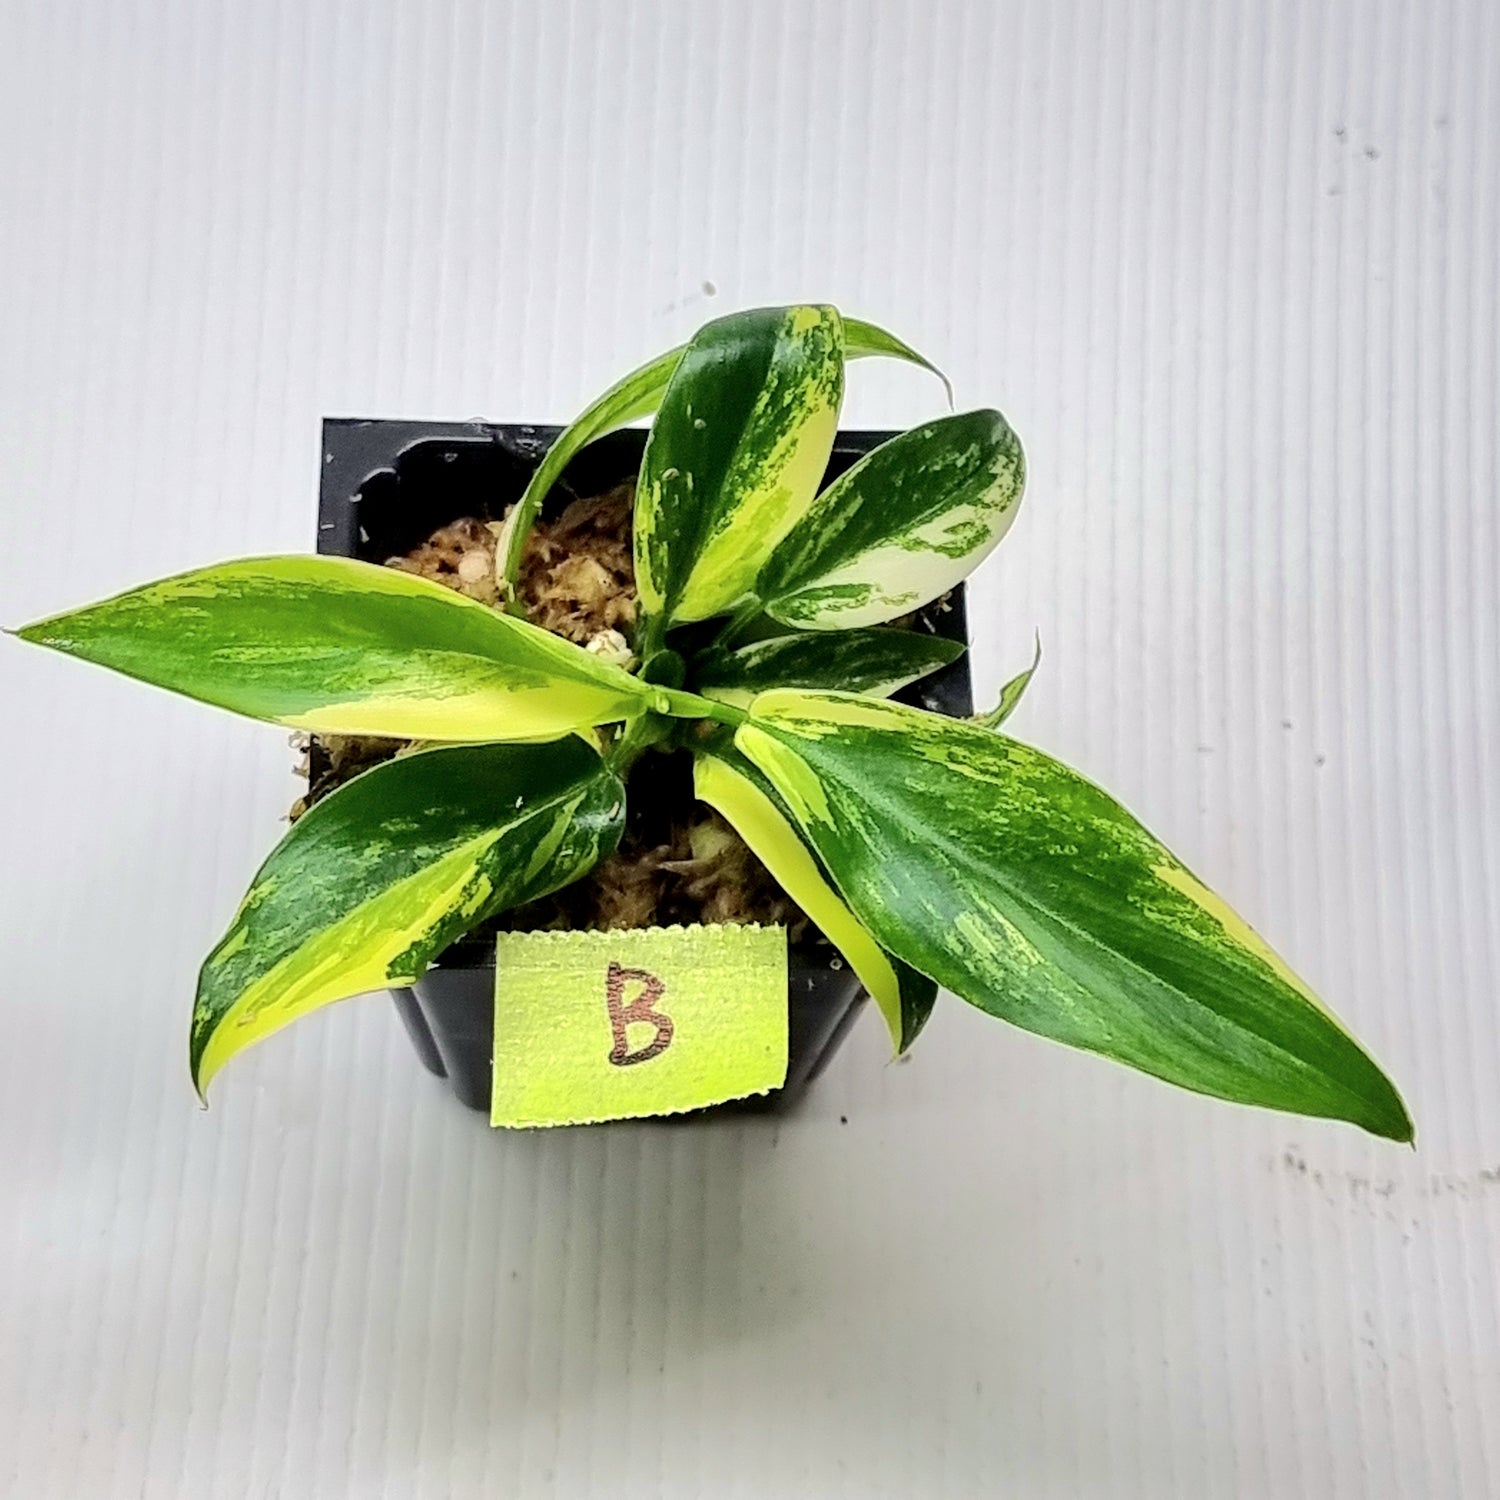 rare Variegated Philodendron Imperial Green for sale in Perth Australia